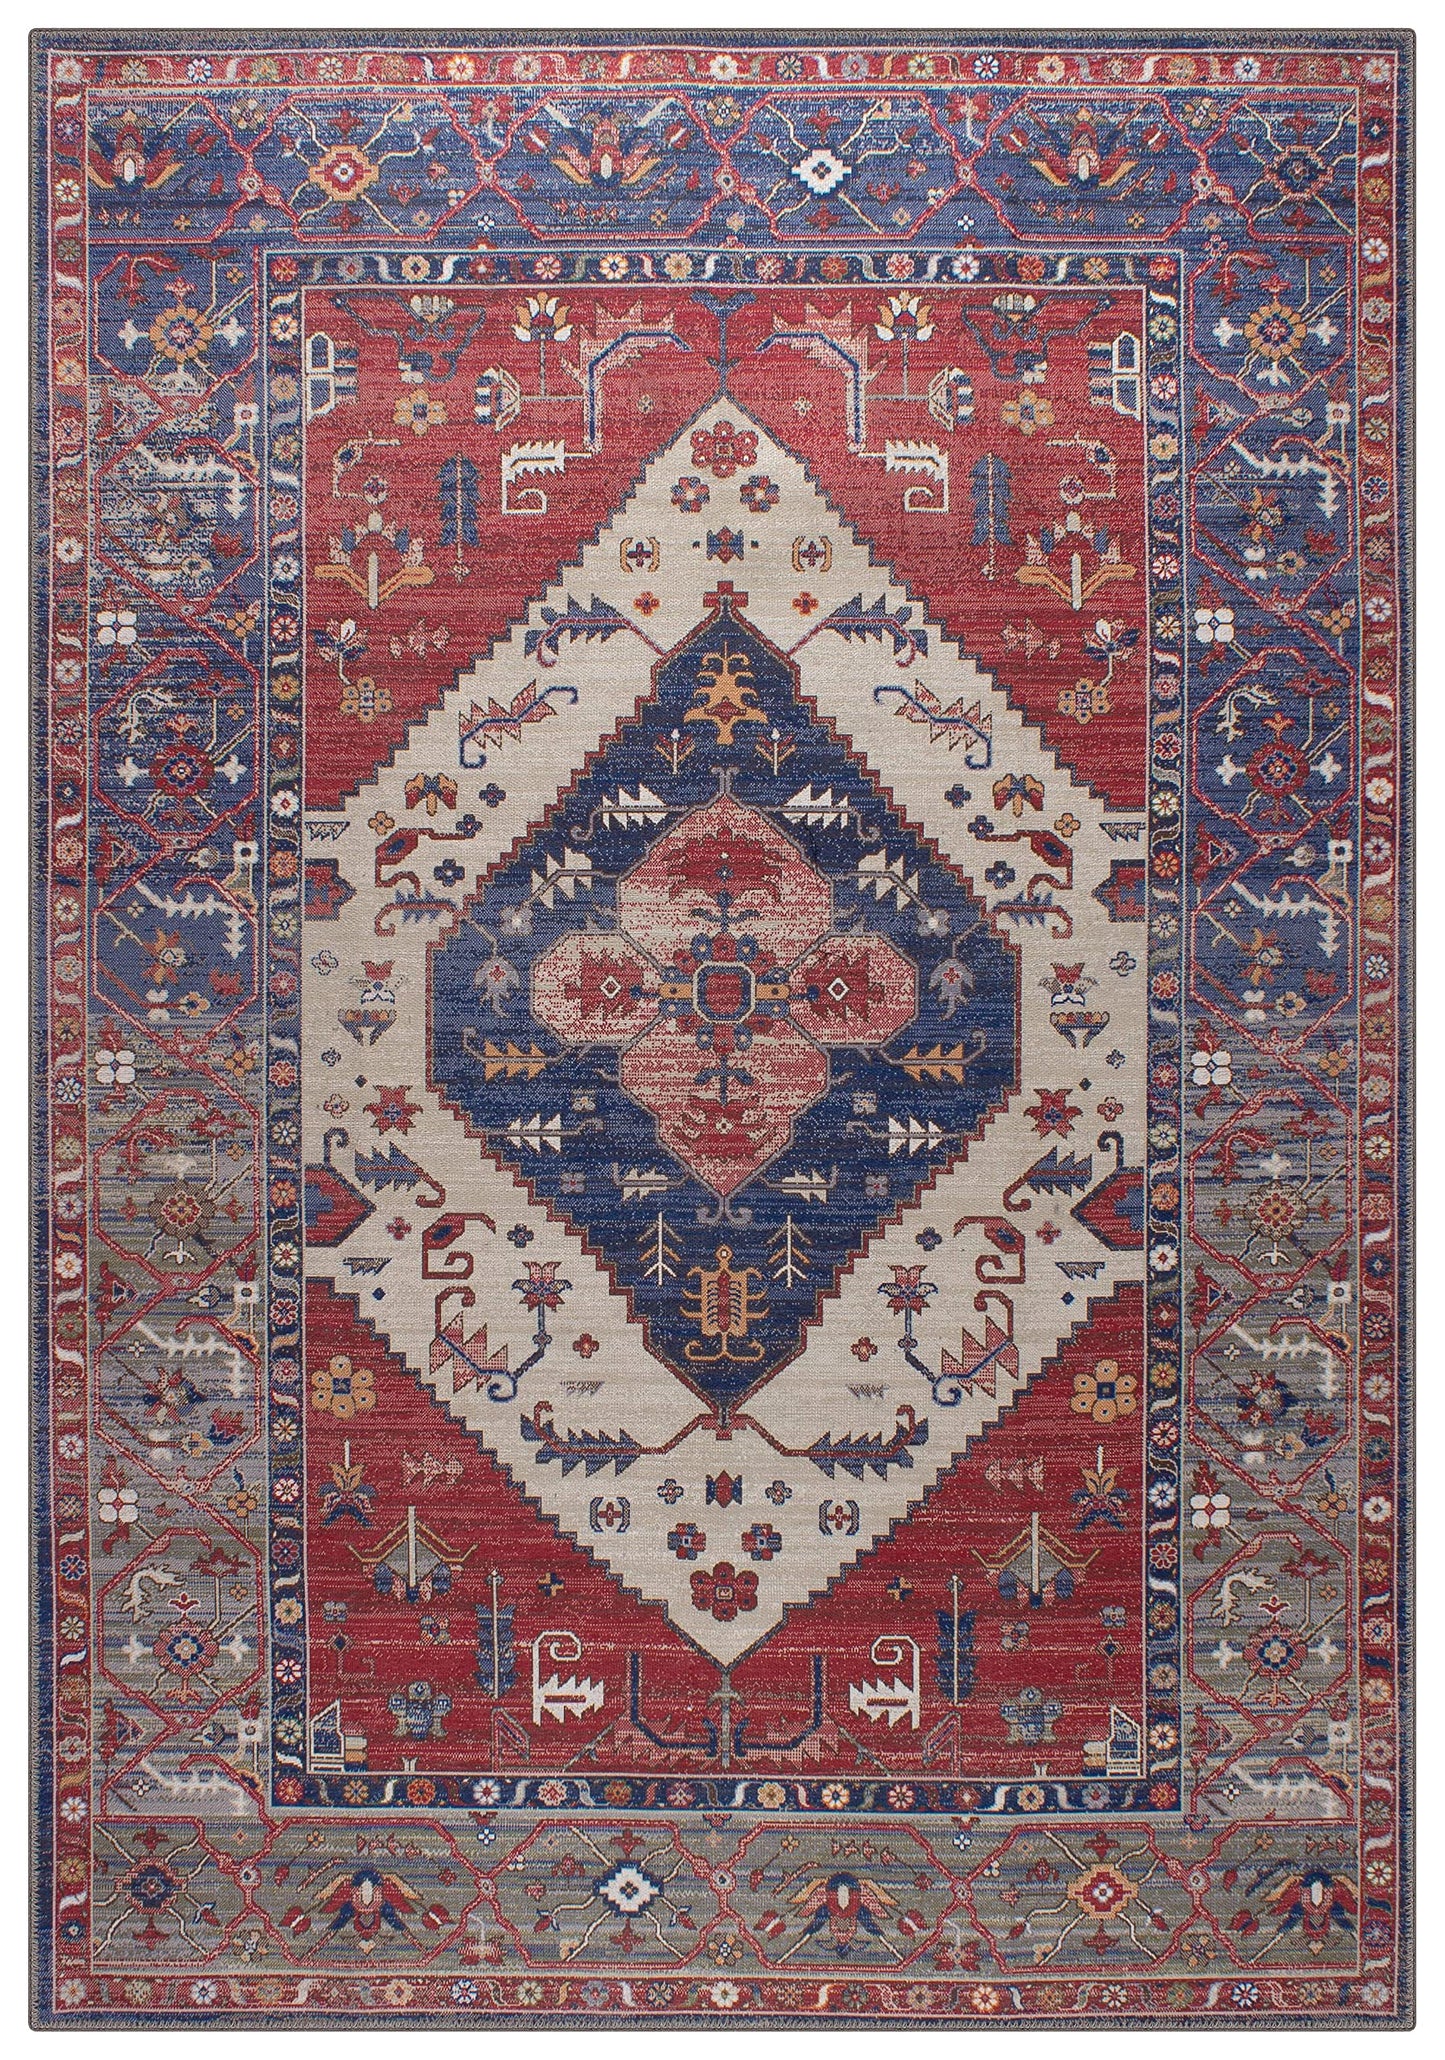 GLN Rugs Machine Washable Area Rug, Rugs for Living Room, Rugs for Bedroom, Bathroom Rug, Kitchen Rug, Printed Vintage Rug, Home Decor Traditional Carpet (Navy/RED, 3' x 5'2")